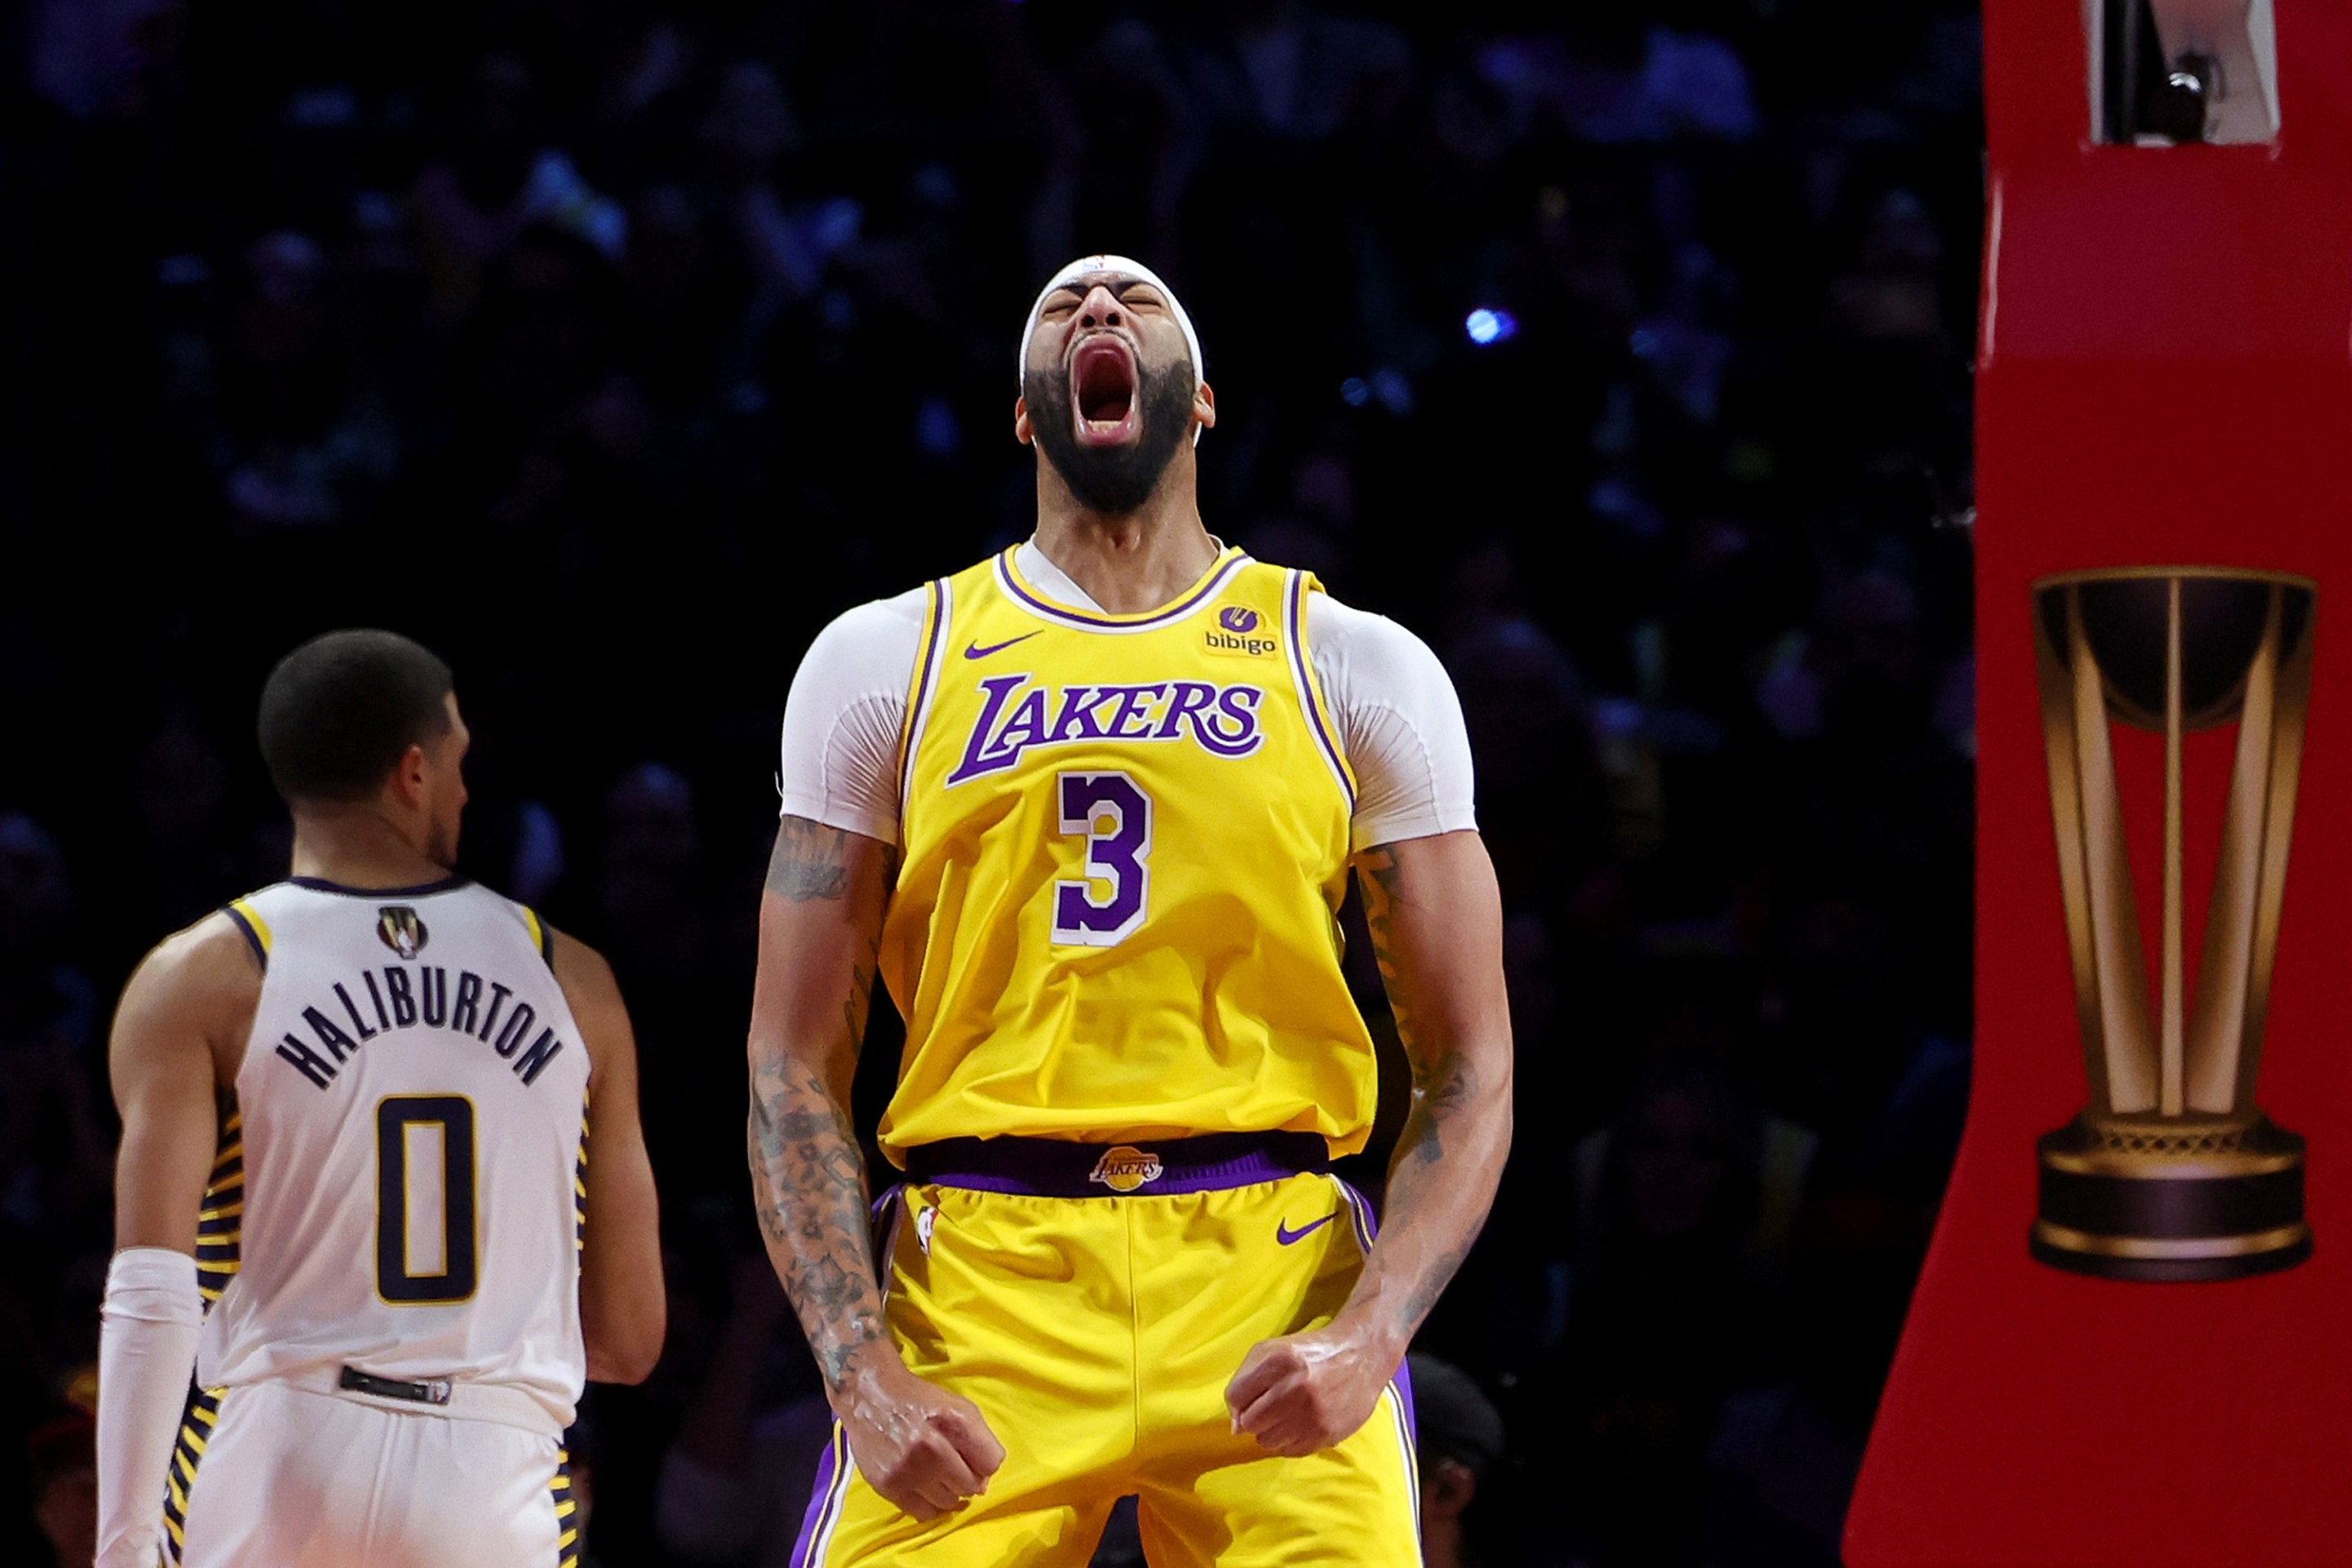 Anthony Davis celebrates a basket during the Lakers' win over the Pacers in the final of the NBA's In-Season Tournament.